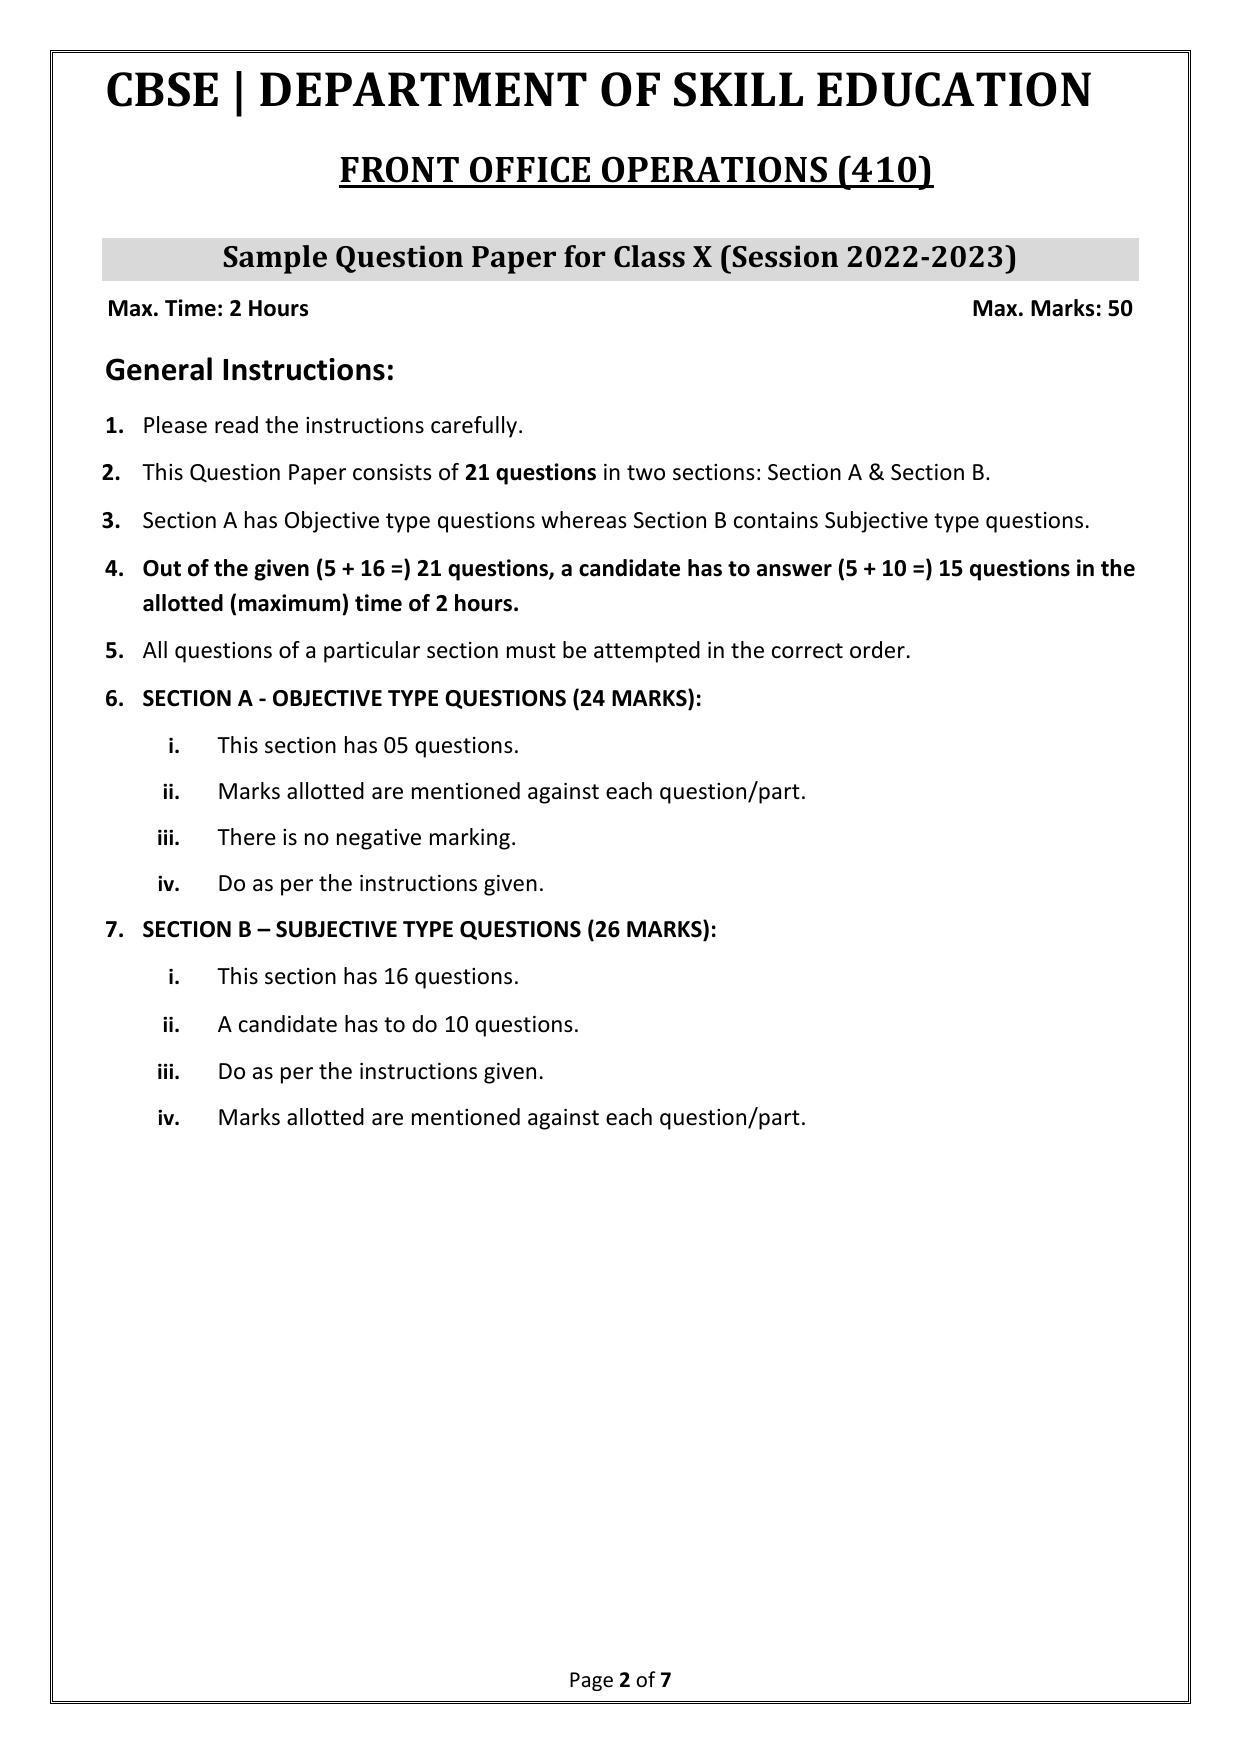 CBSE Class 10 (Skill Education) Front Office Operations Sample Papers 2023 - Page 2